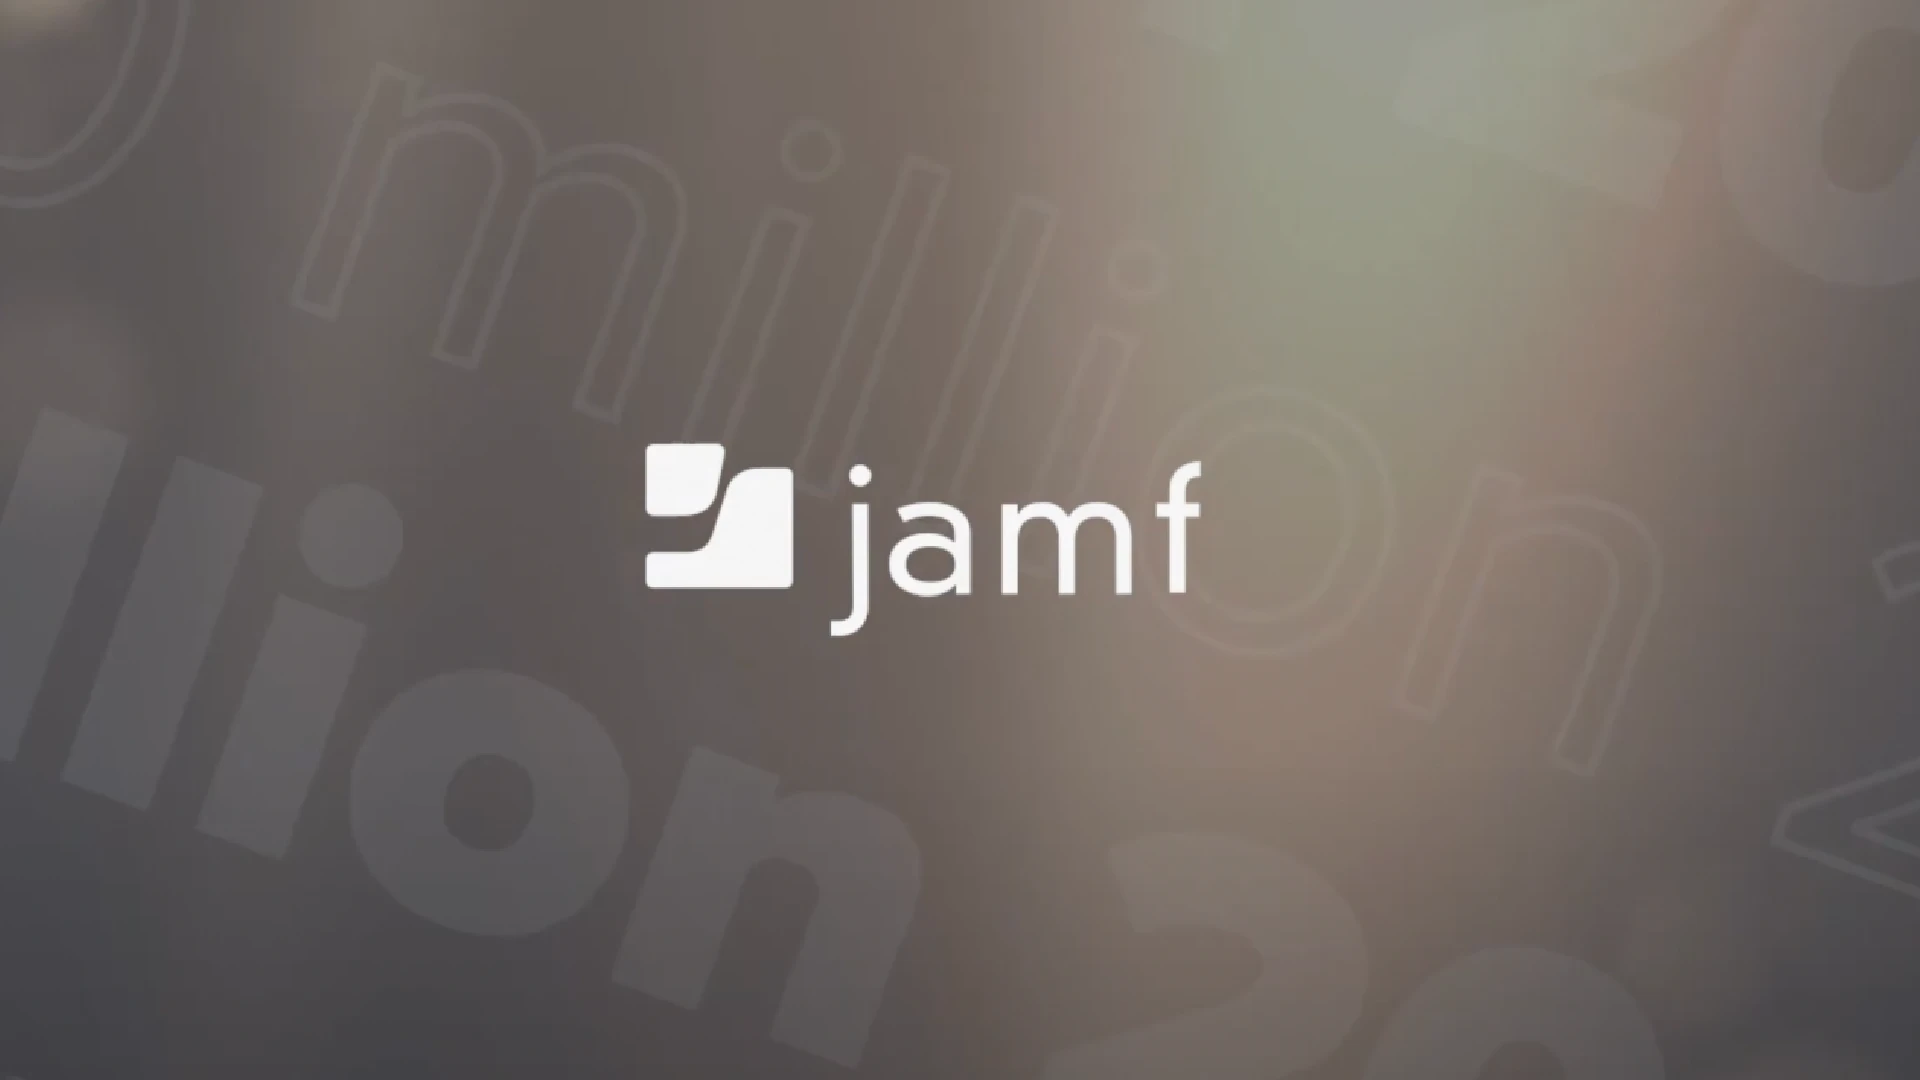 Jamf Offers A Solution For Companies Distributing Hardware To WFH Employees